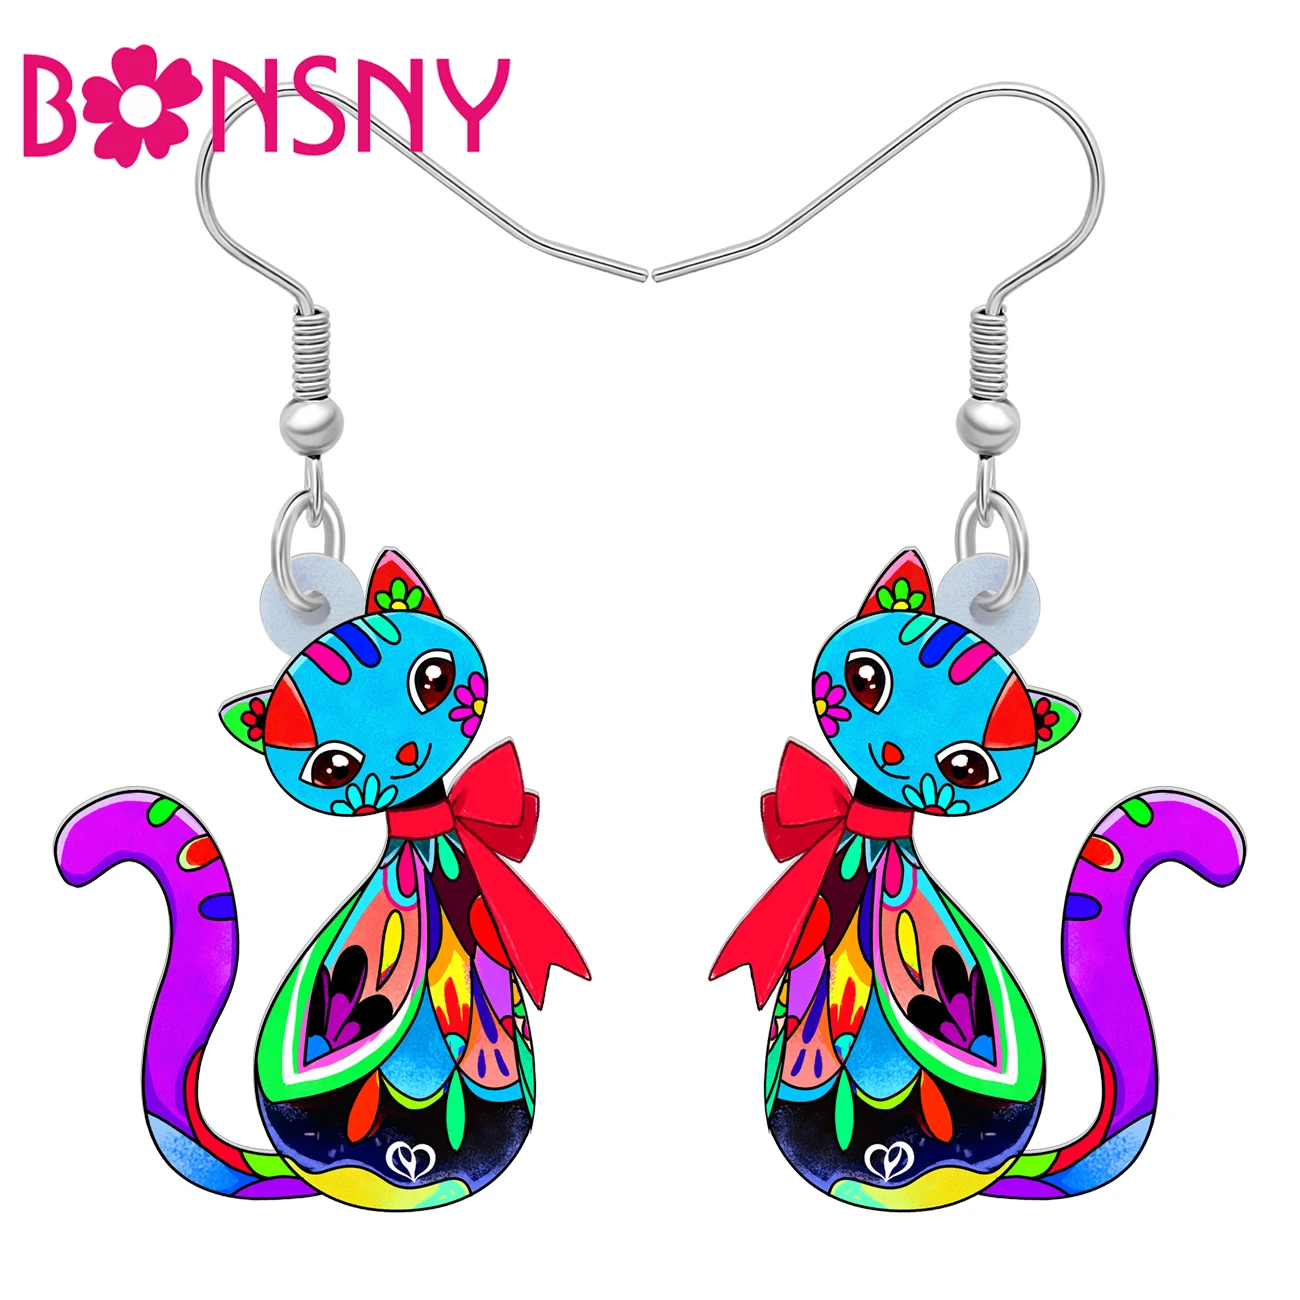 Bonsny Acrylic Cute Bow Tie Cat Earrings Novelty Sweet Animals Dangle Drop Jewelry Charms For Women Girl Teens Gifts Accessories